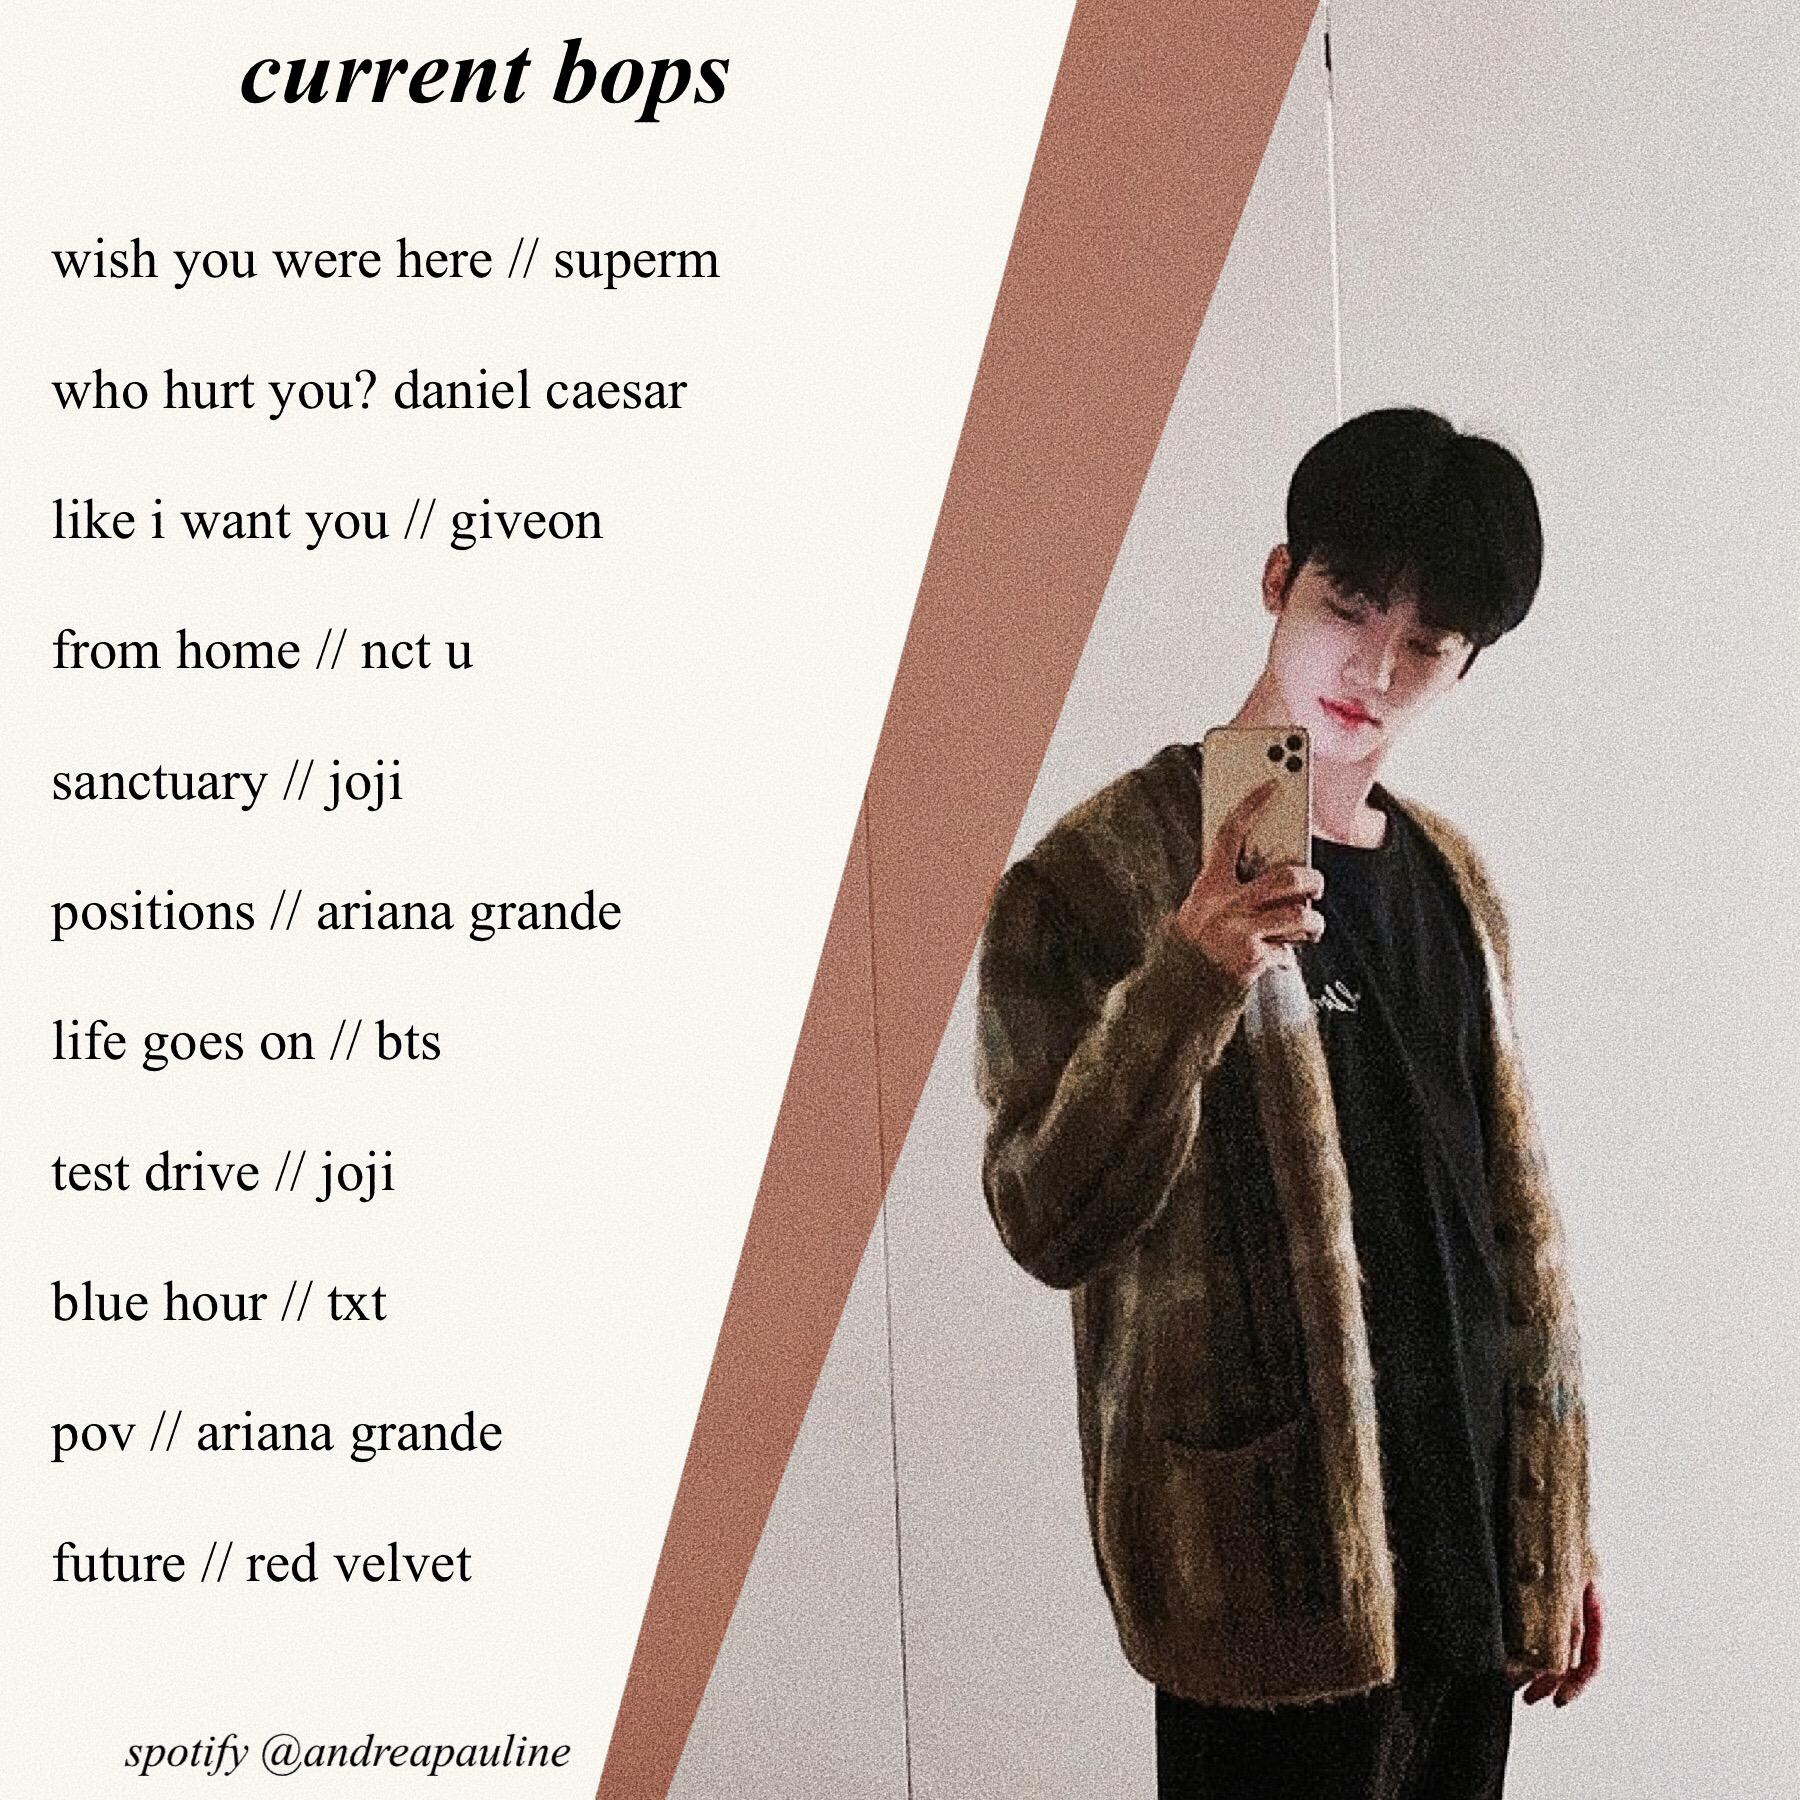 🧺
heyy >:) here’s a lil playlist for my current bops :) also OMG DID YALL SEE DOYOUNG’S NEW INSTA POST, I WILL BE PASSING AWAY NOW. anyways, have a great weekend !! 😌✌🏼